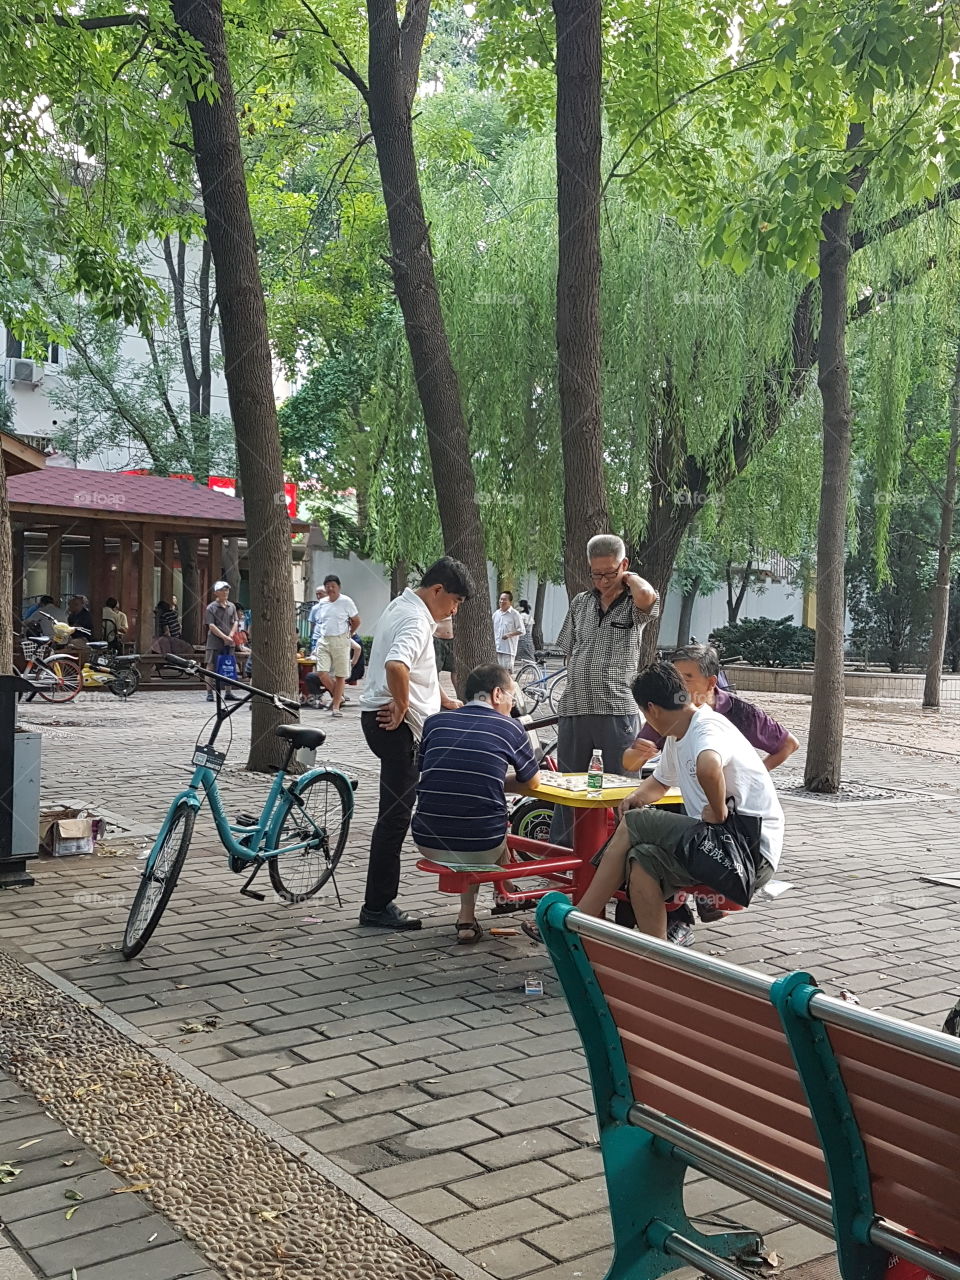 Chinese evening in park